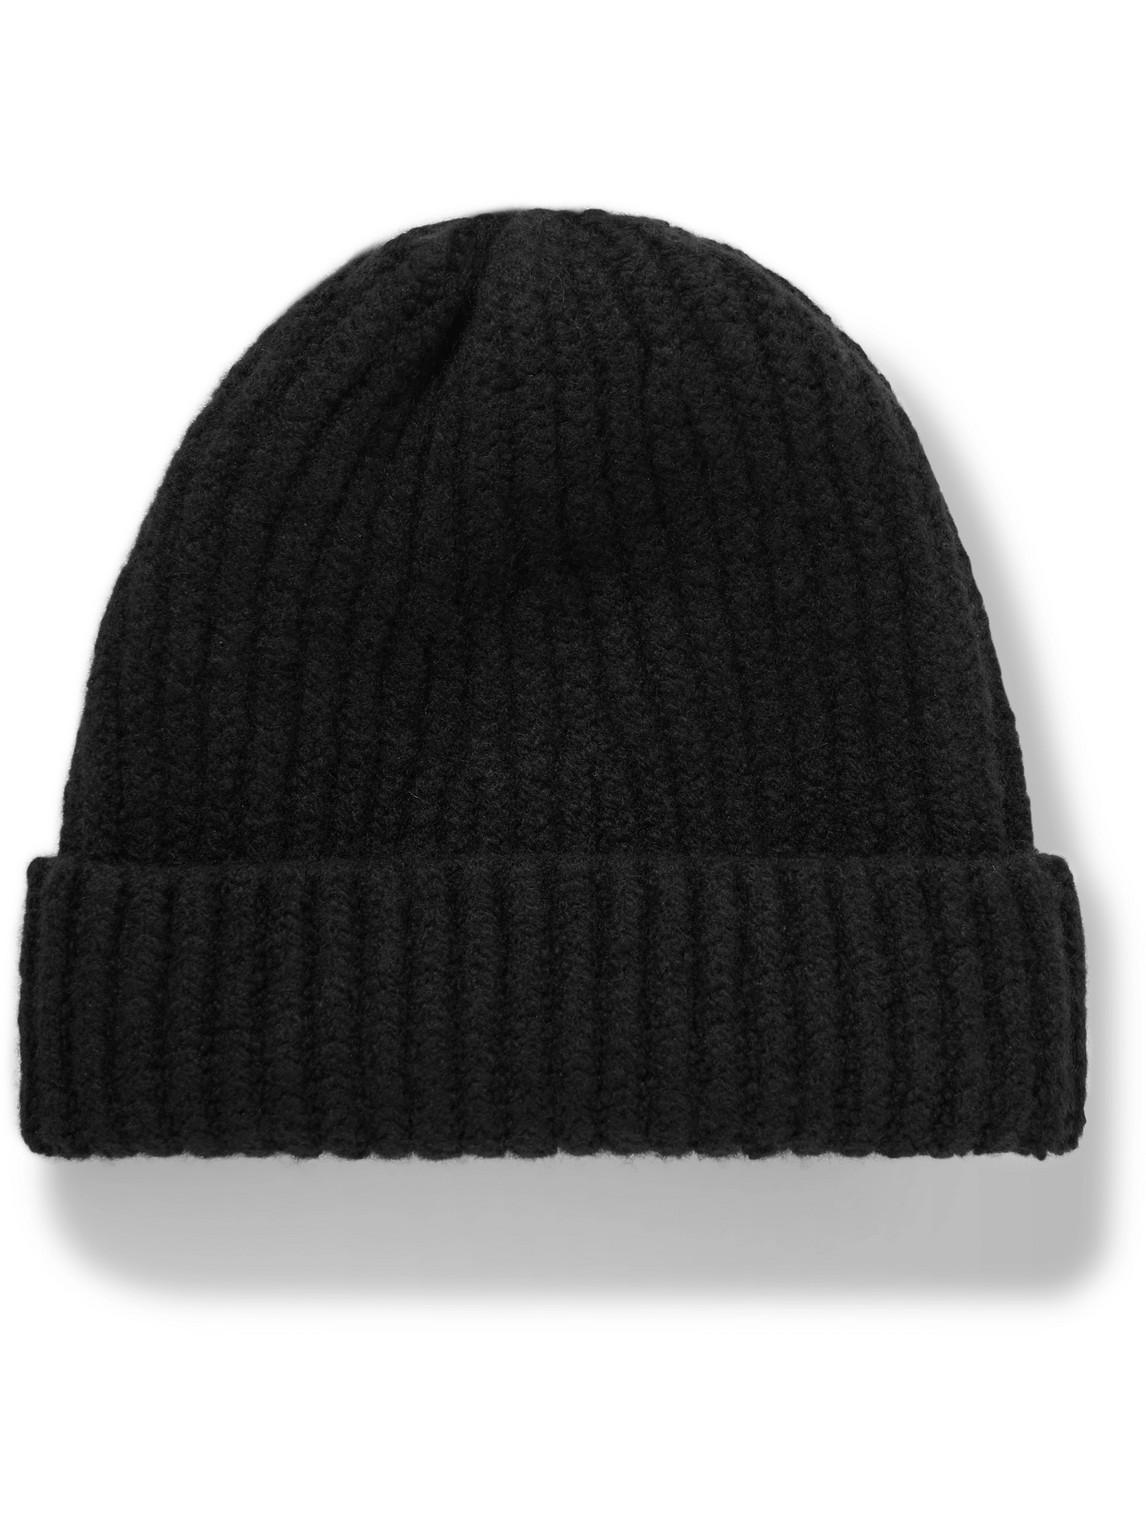 Inis Meáin Ribbed Merino Wool and Cashmere-Blend Beanie